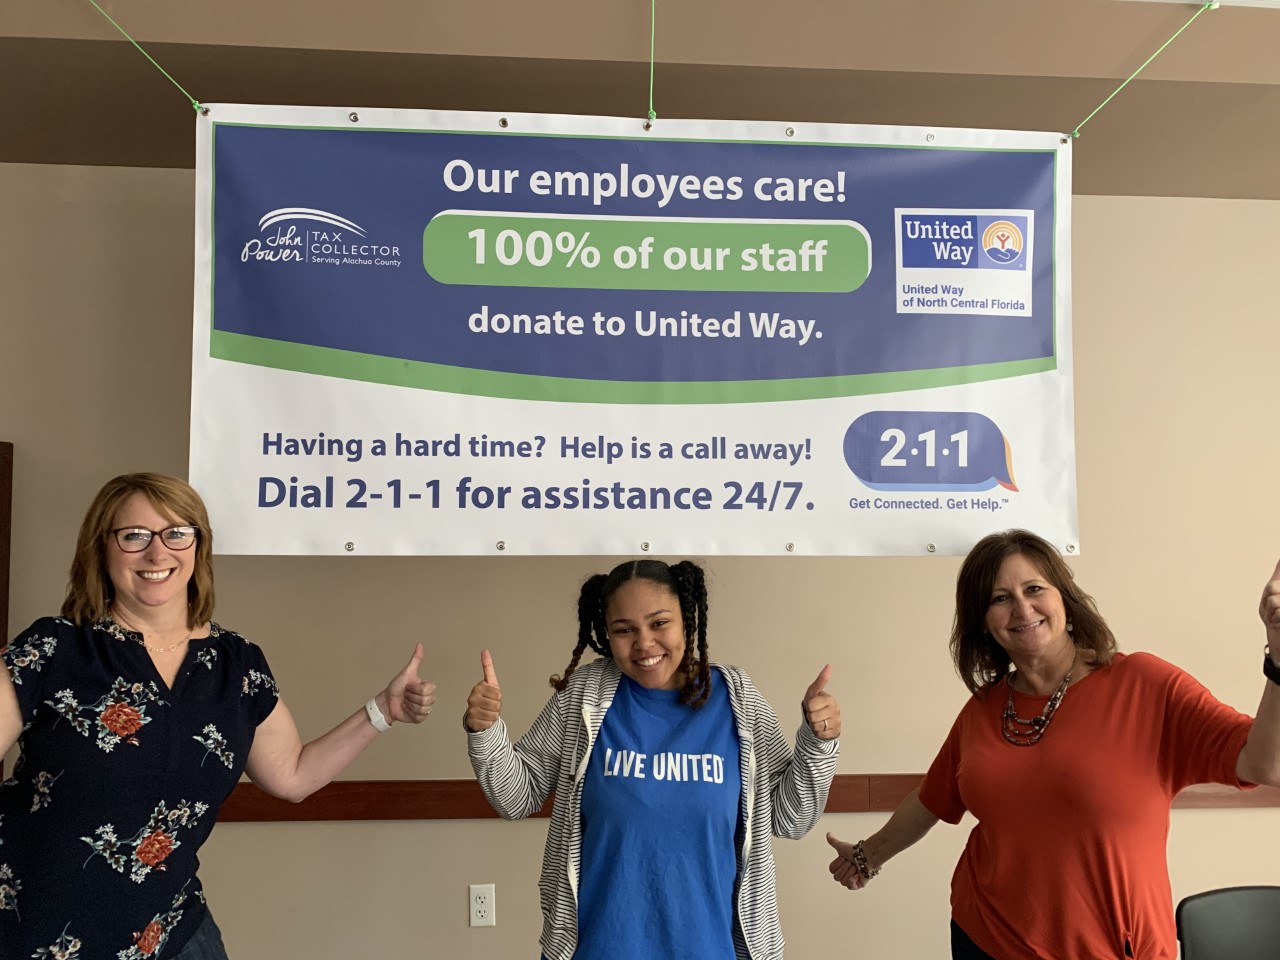 Three Tax Collector Employees standing under United Way banner.